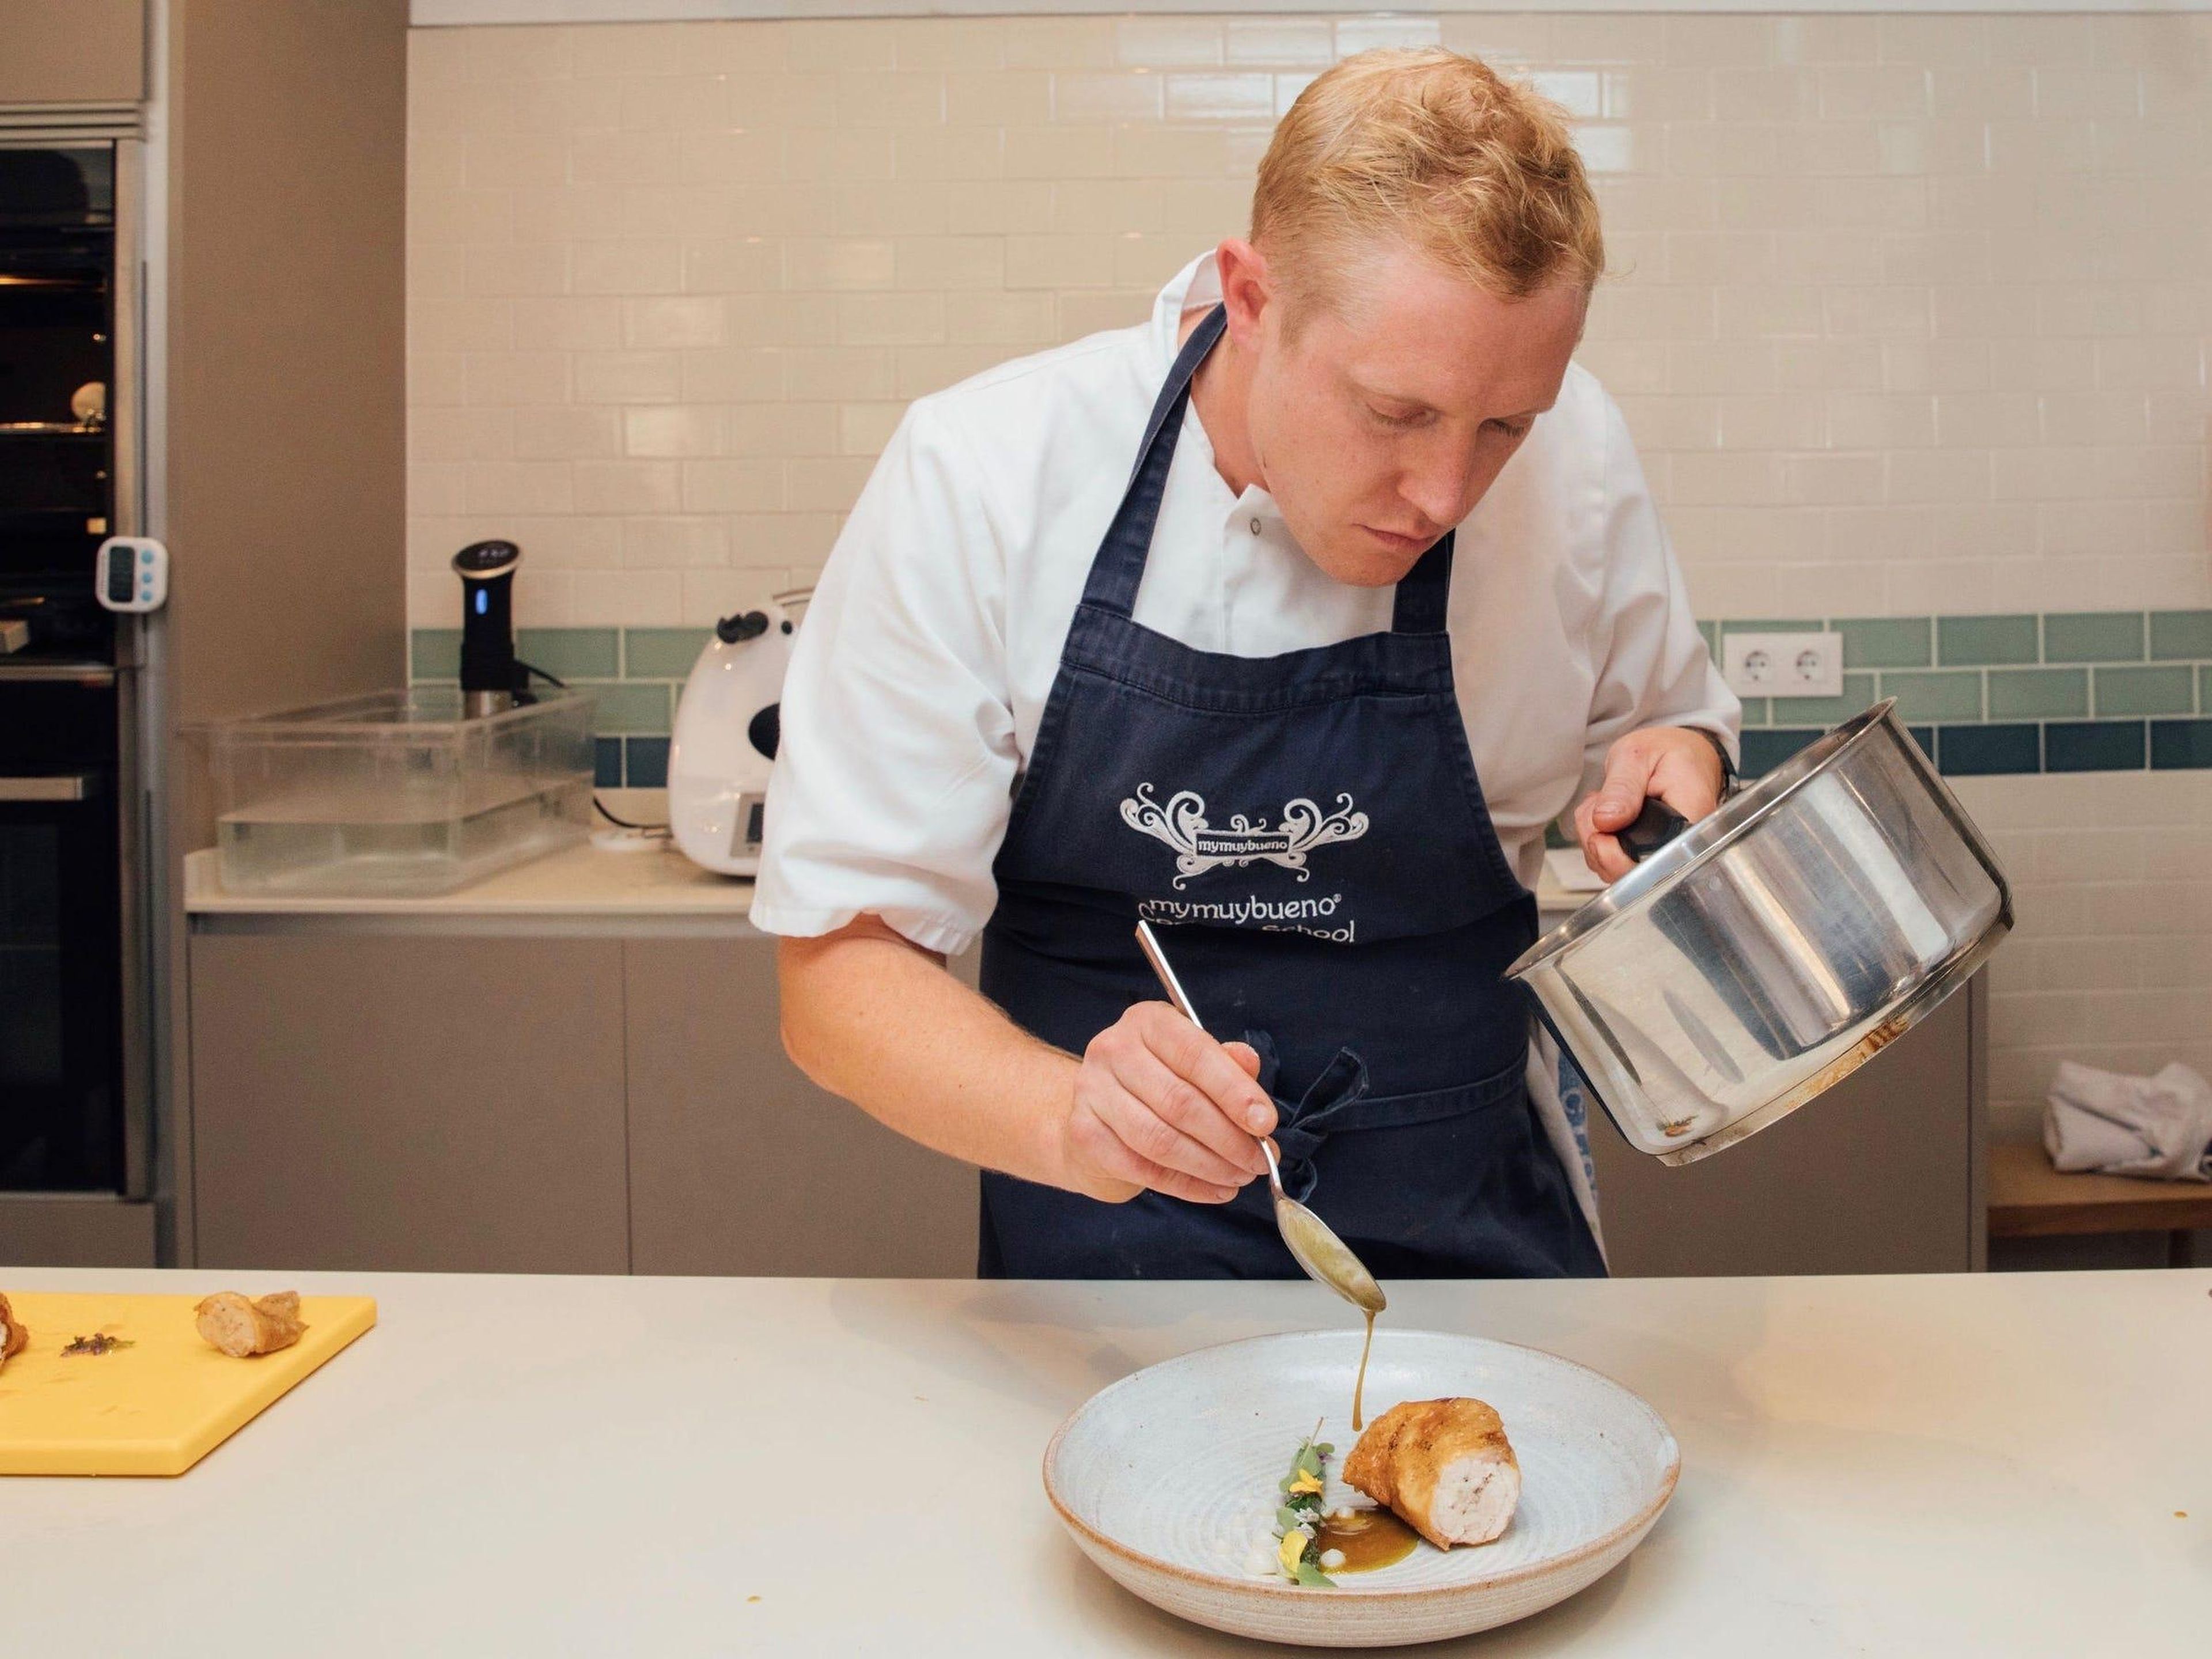 Michelin-starred chefs are leaving their jobs to become private chefs for the ultra-rich, where they can make upwards of $14,000 a month